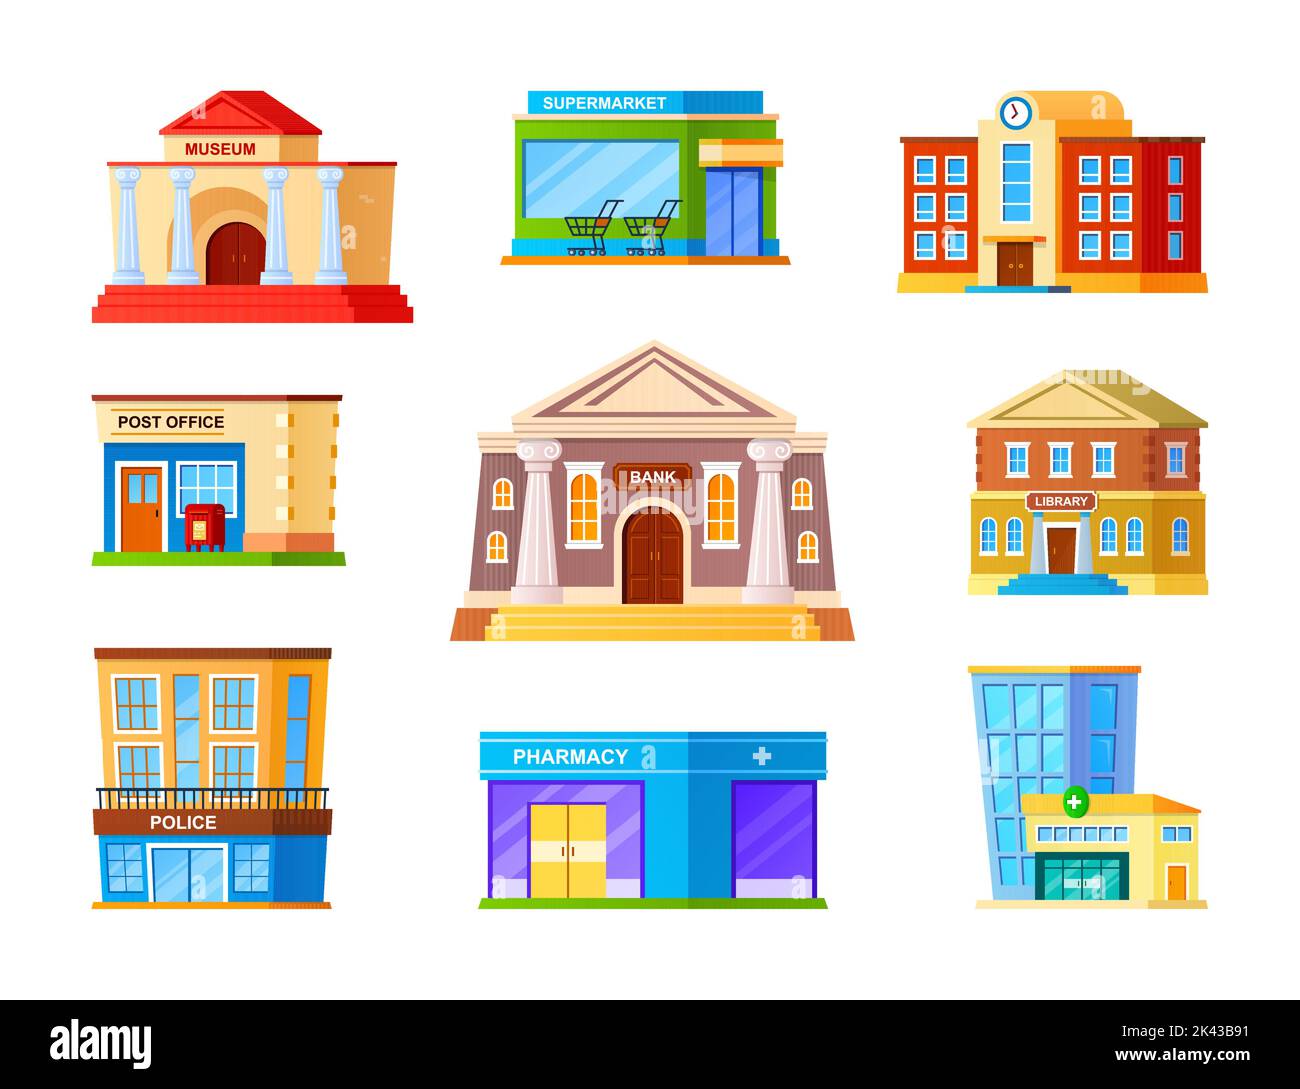 Urban architecture and buildings - flat design style object set. High quality images of museum, supermarket, elementary school, post office, bank, lib Stock Vector